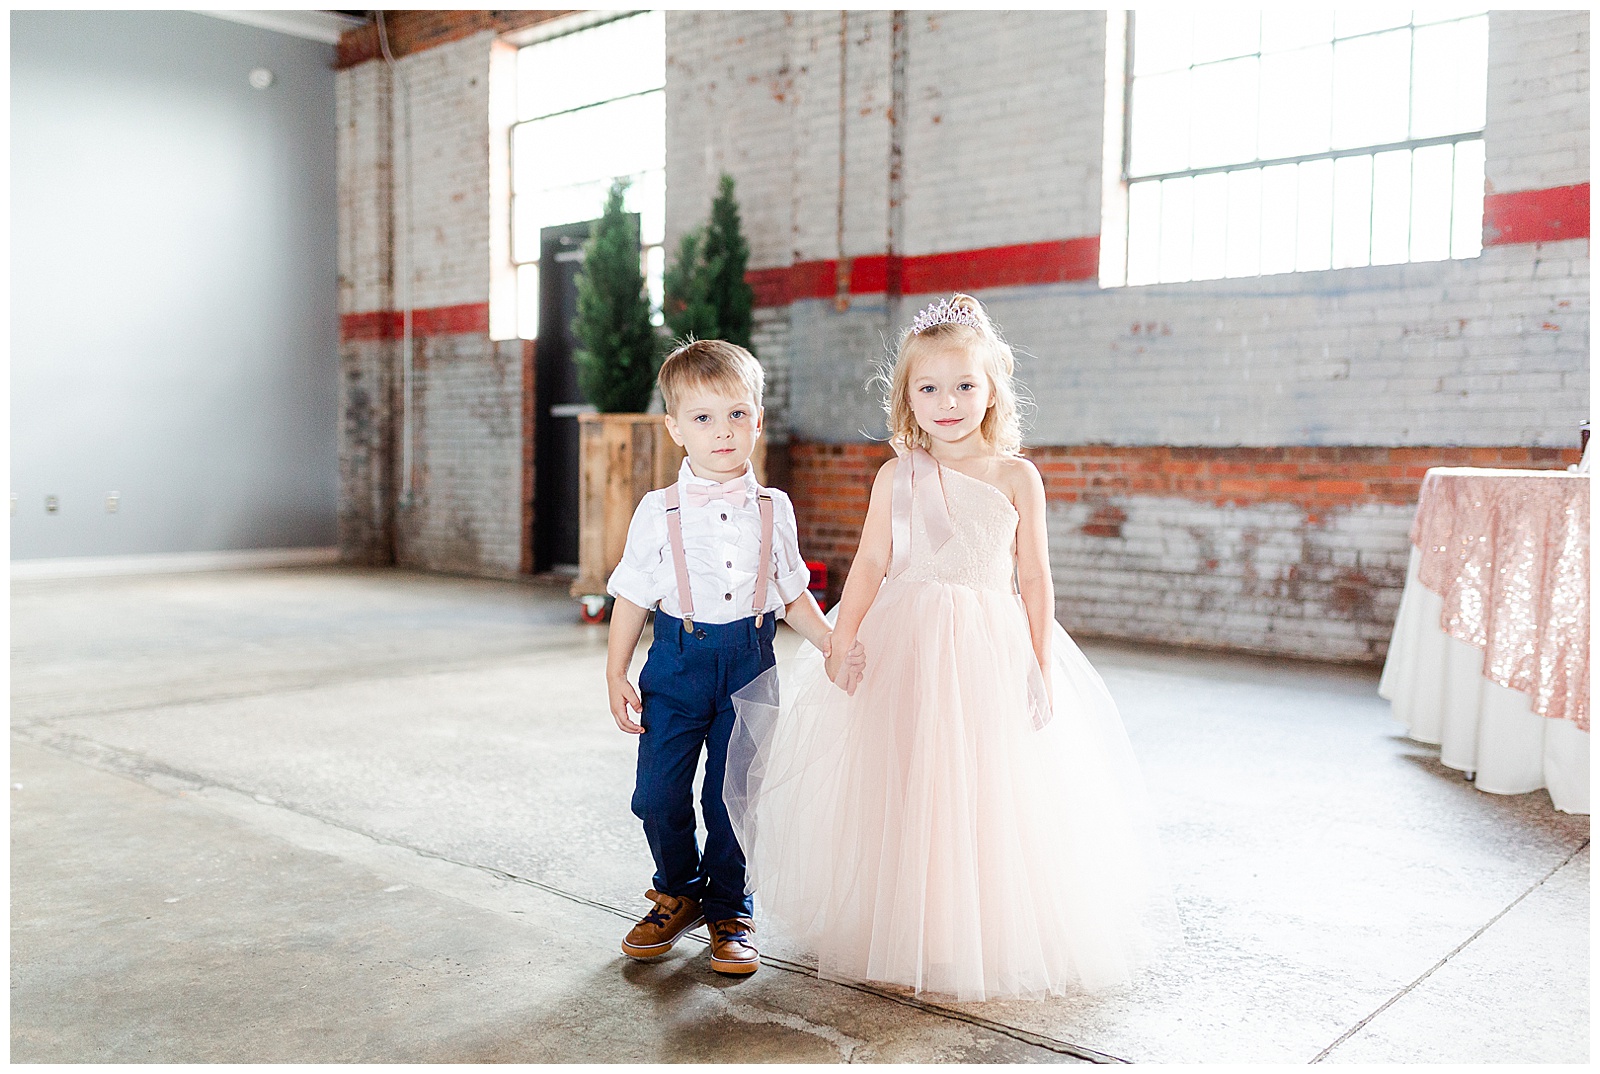 Adorable Flower Girl and Ring Boy Photos in Fluffy Pink Dress and Suspenders from Summer Wedding in Charlotte, NC | Check out the full wedding at KevynDixonPhoto.com